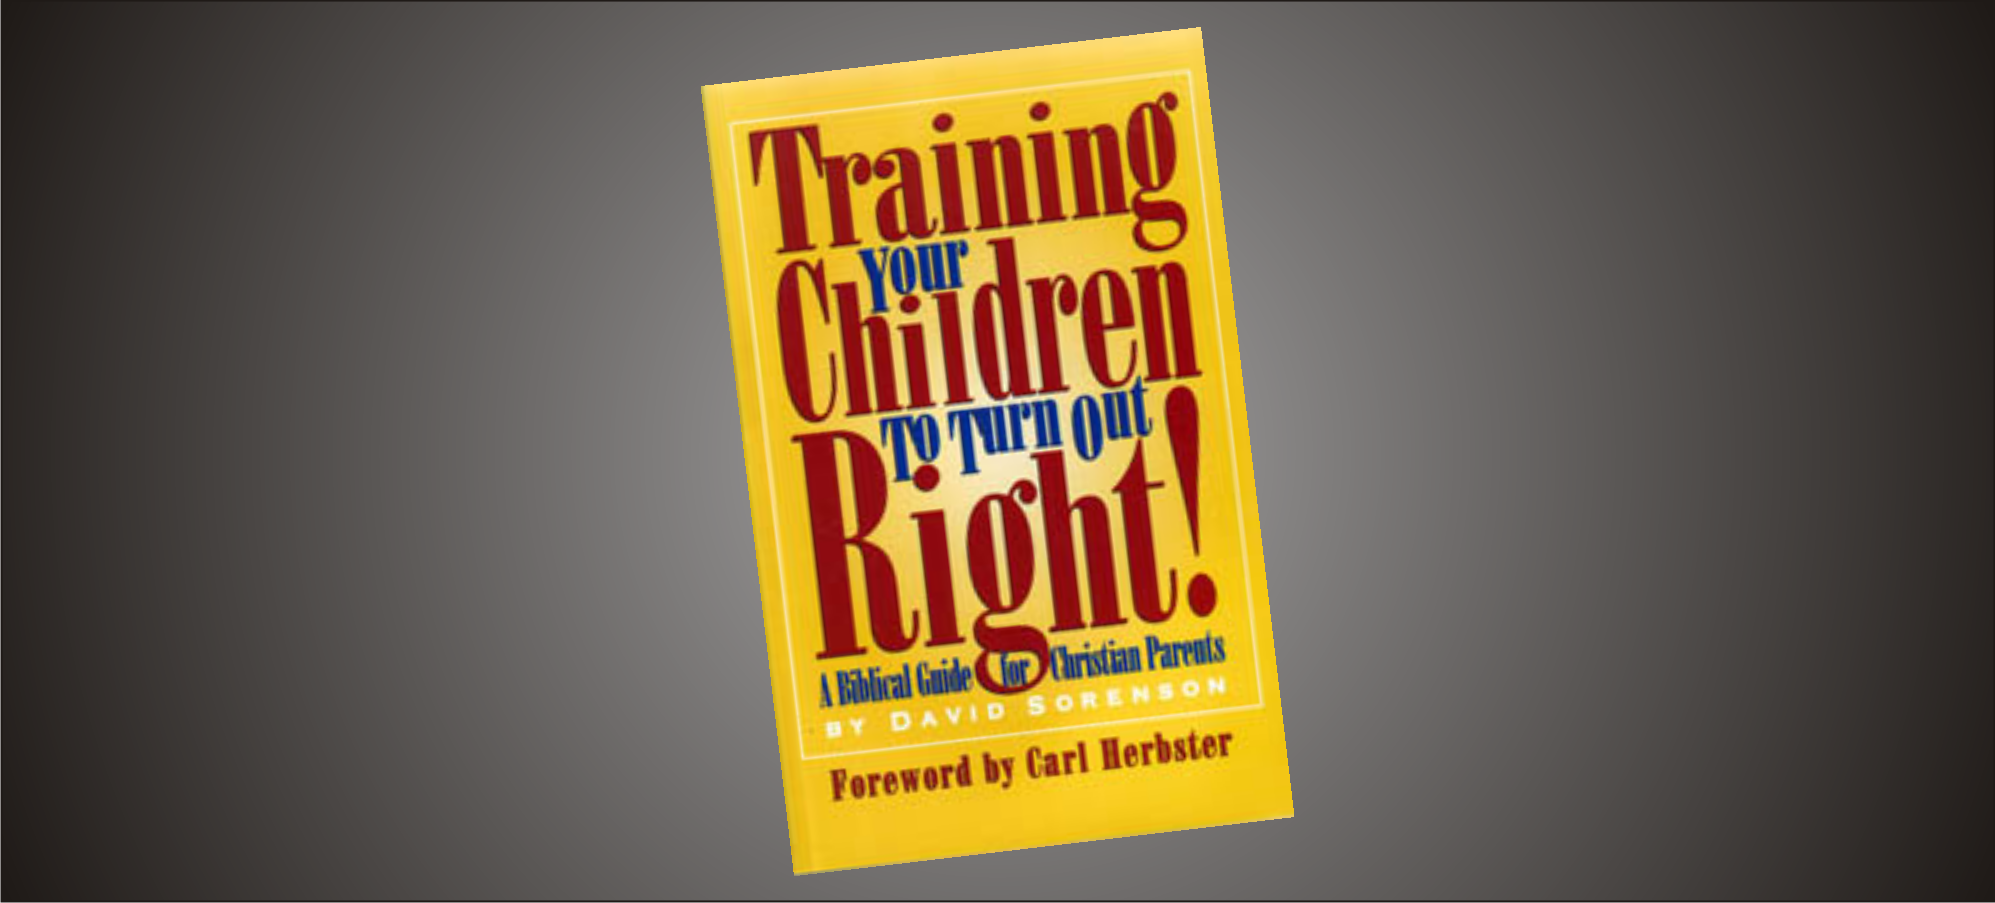 Training Your Children To Turn Out Right!